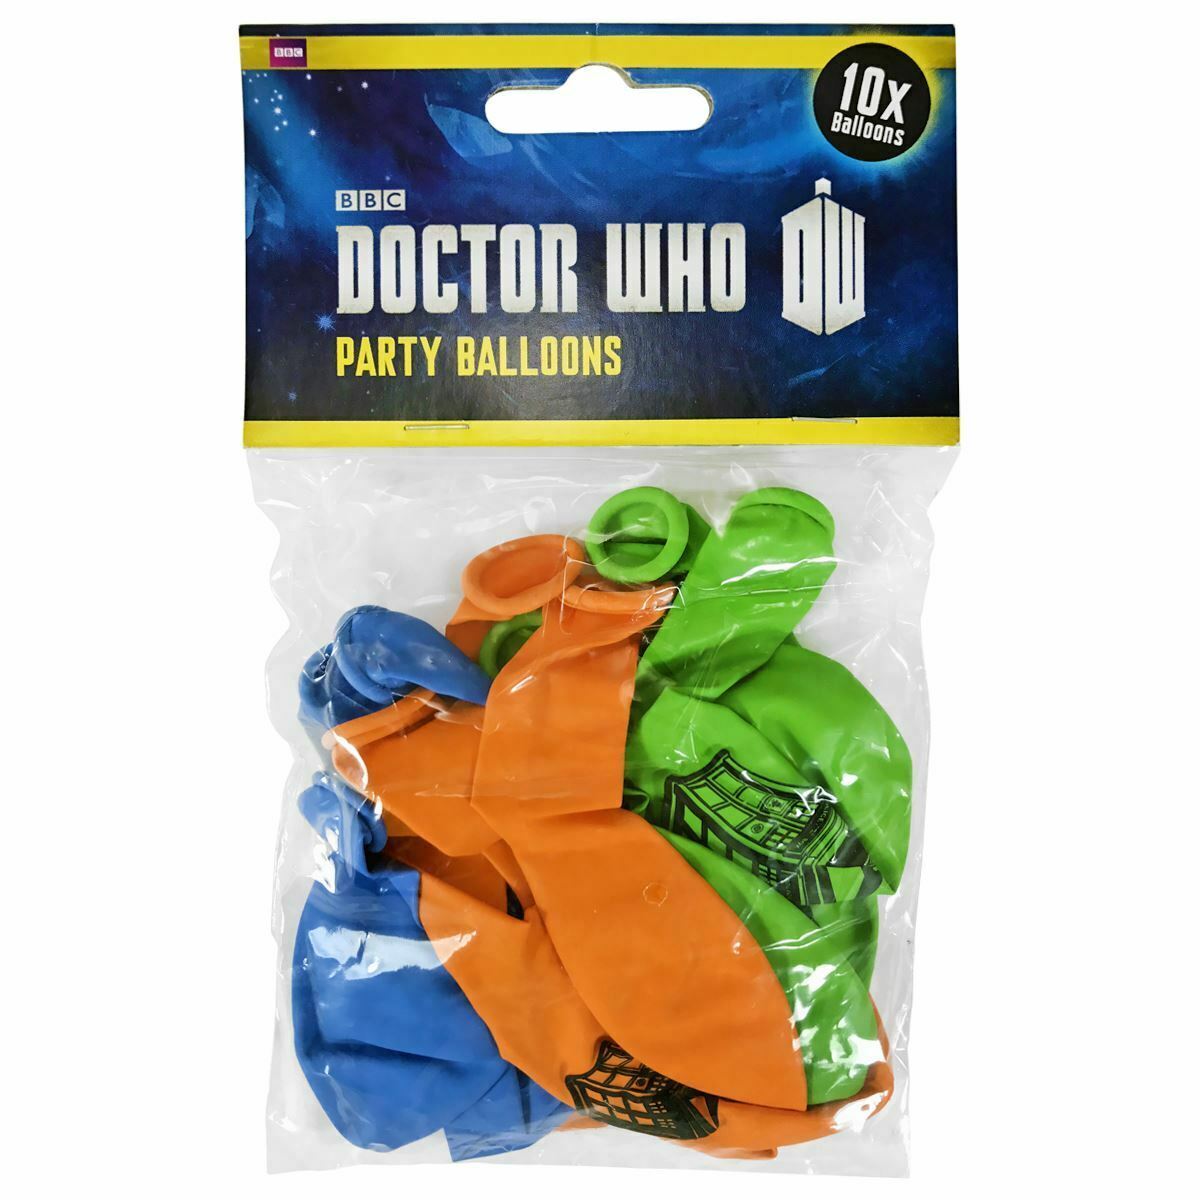 5 PACKS Doctor Who TARDIS Balloons 10 Packs Birthday Party Supplies Official